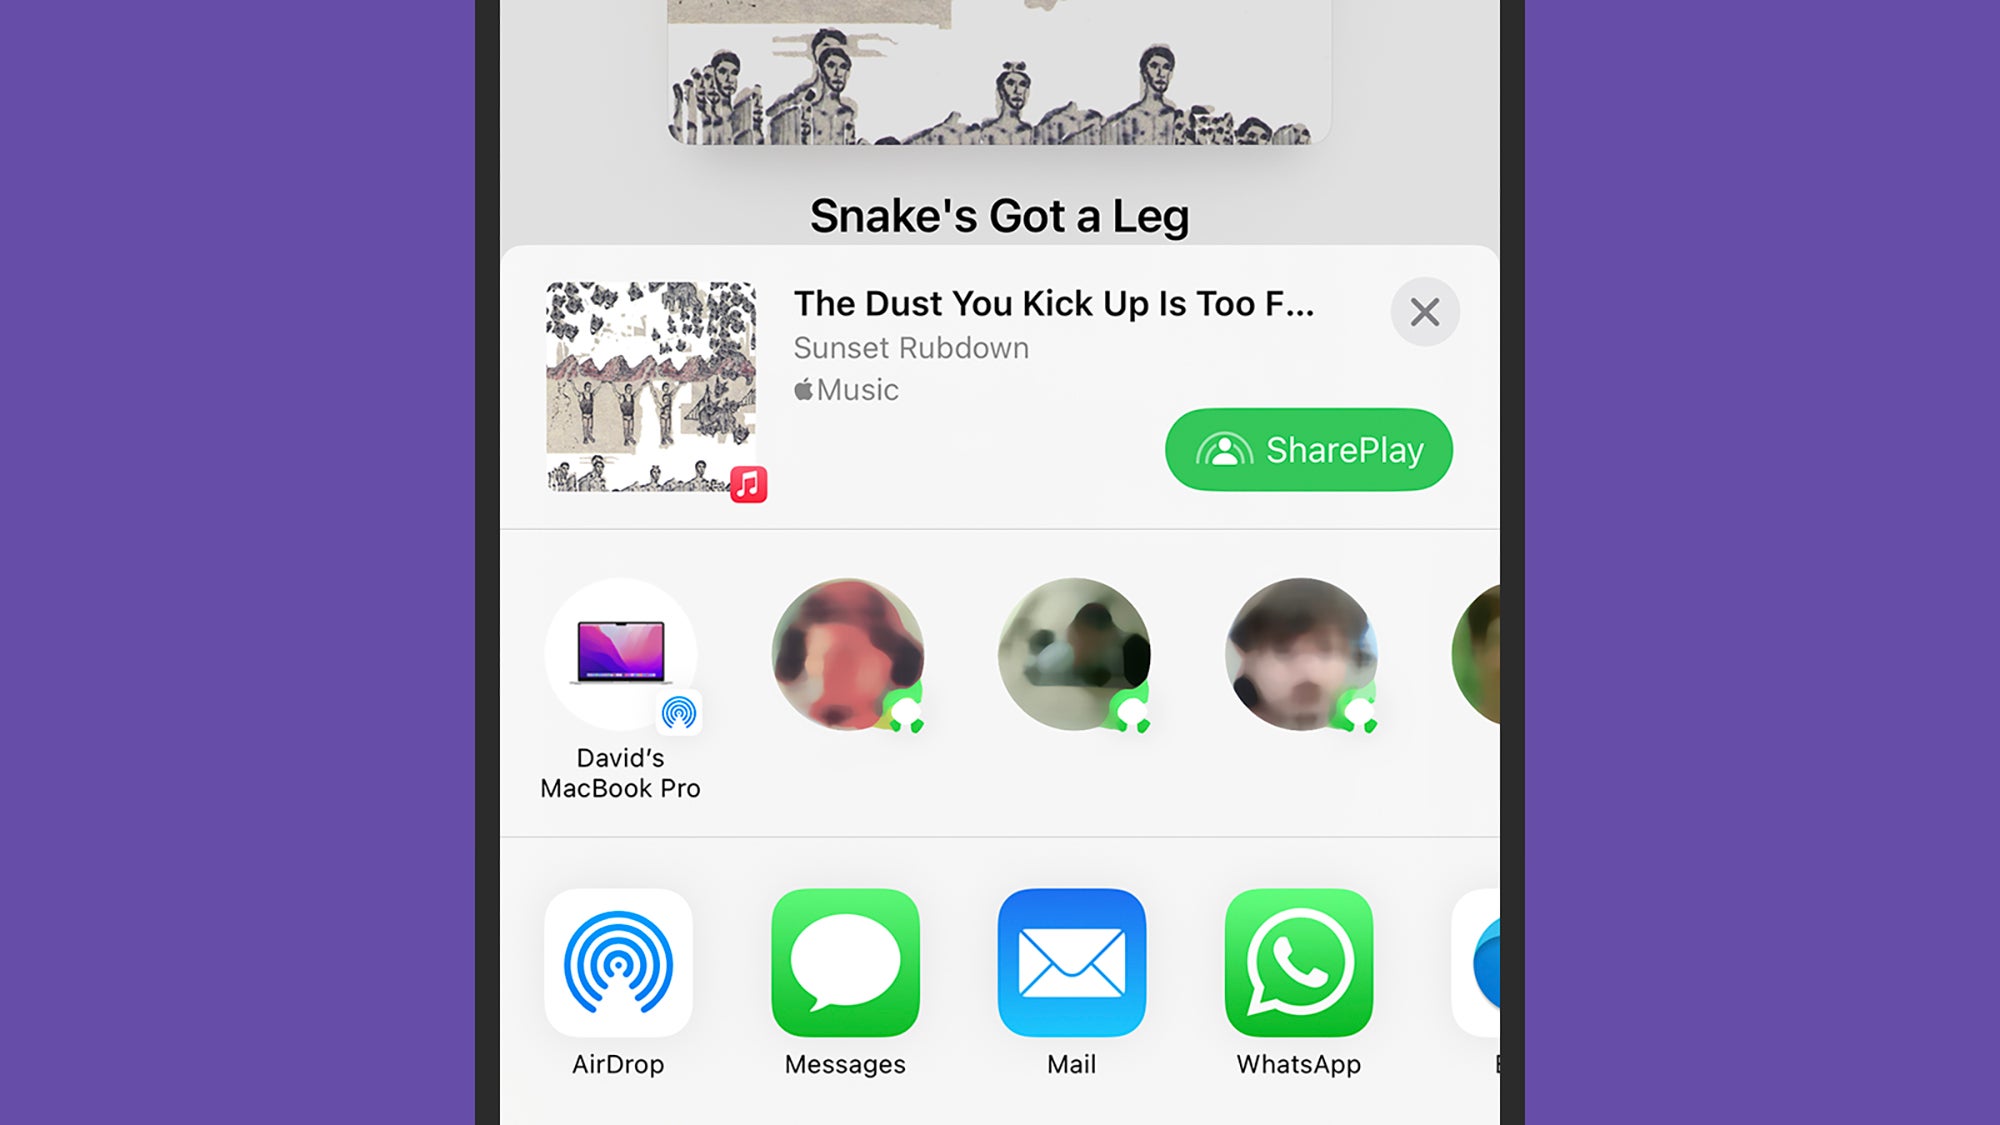 Apple Music is one of the apps where SharePlay is enabled.